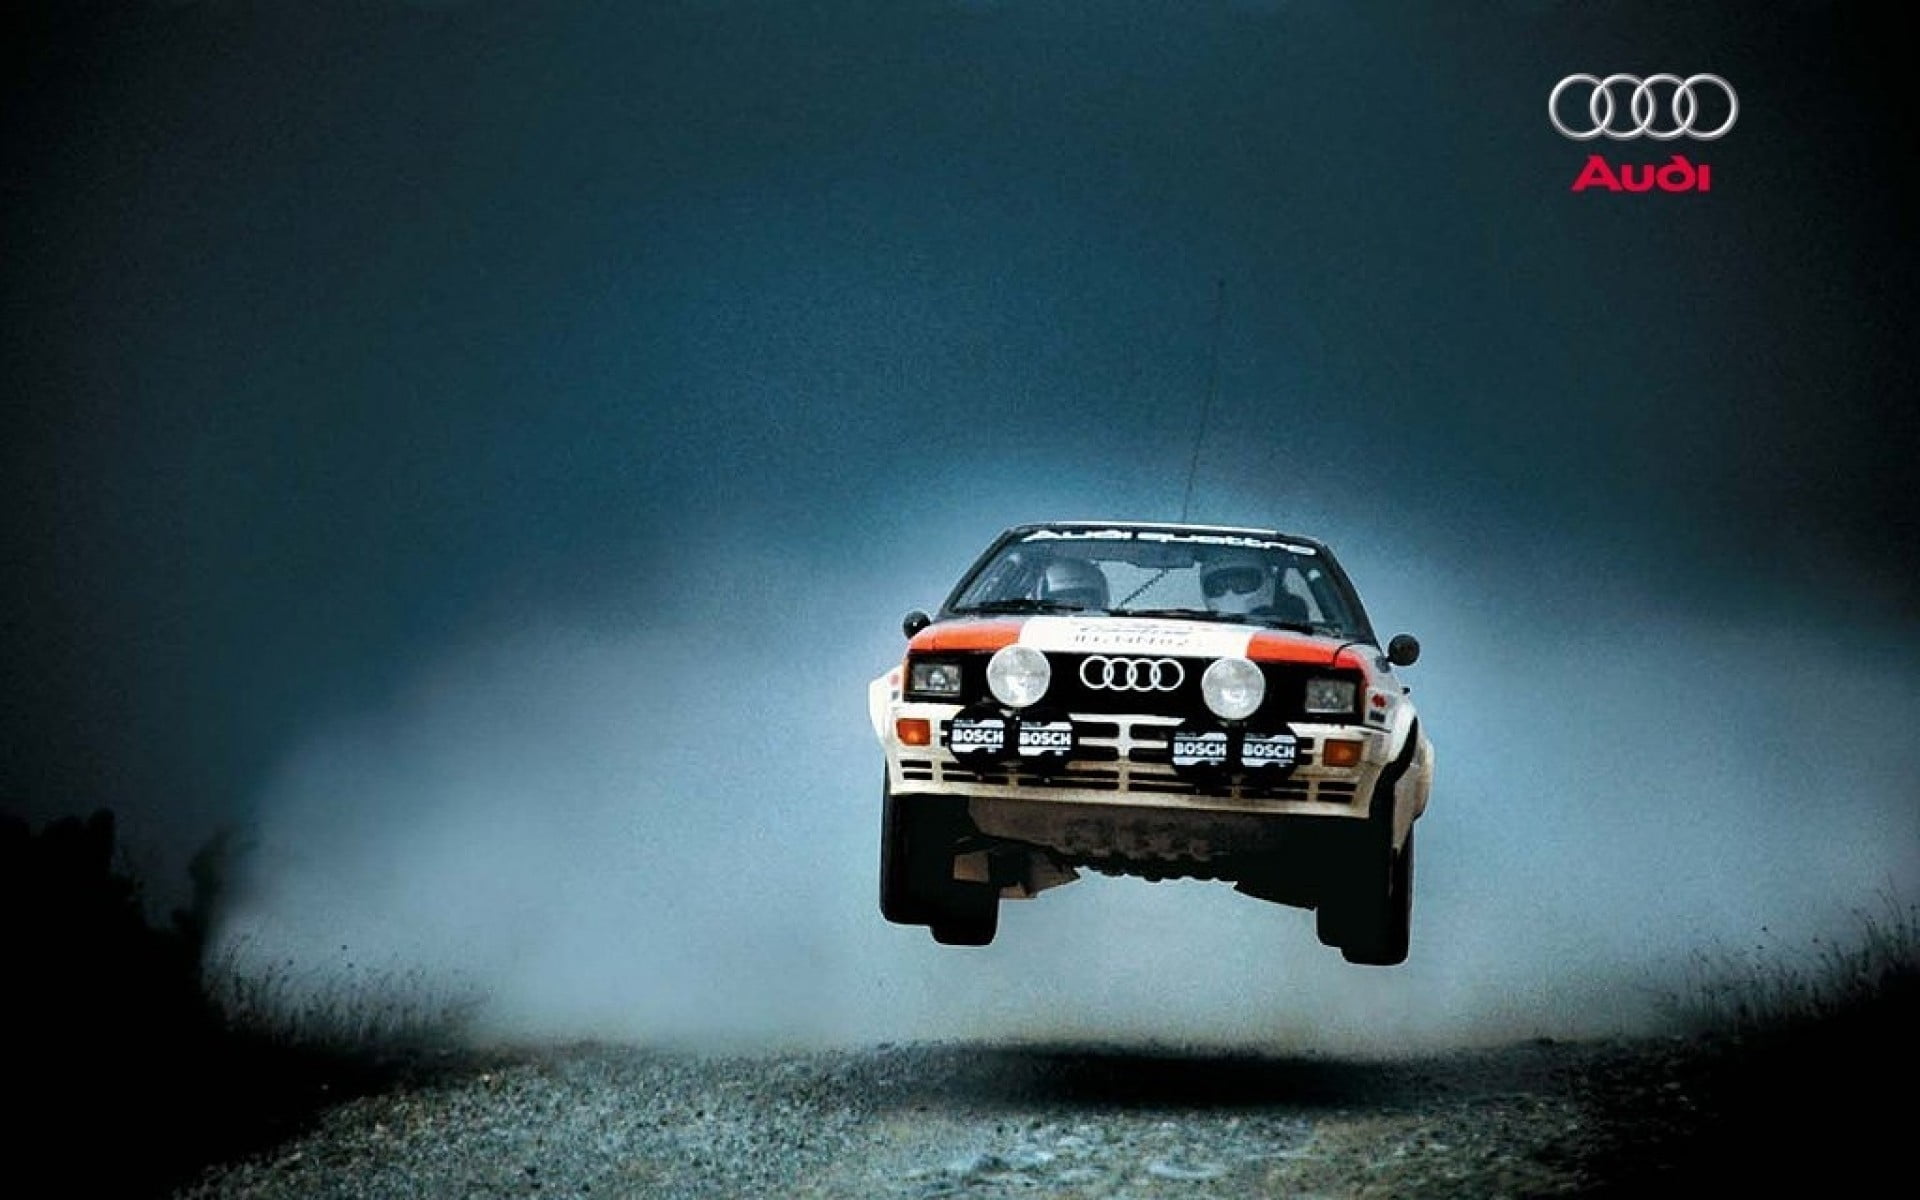 white and red Audi car, audi quattro, rally cars, sports car